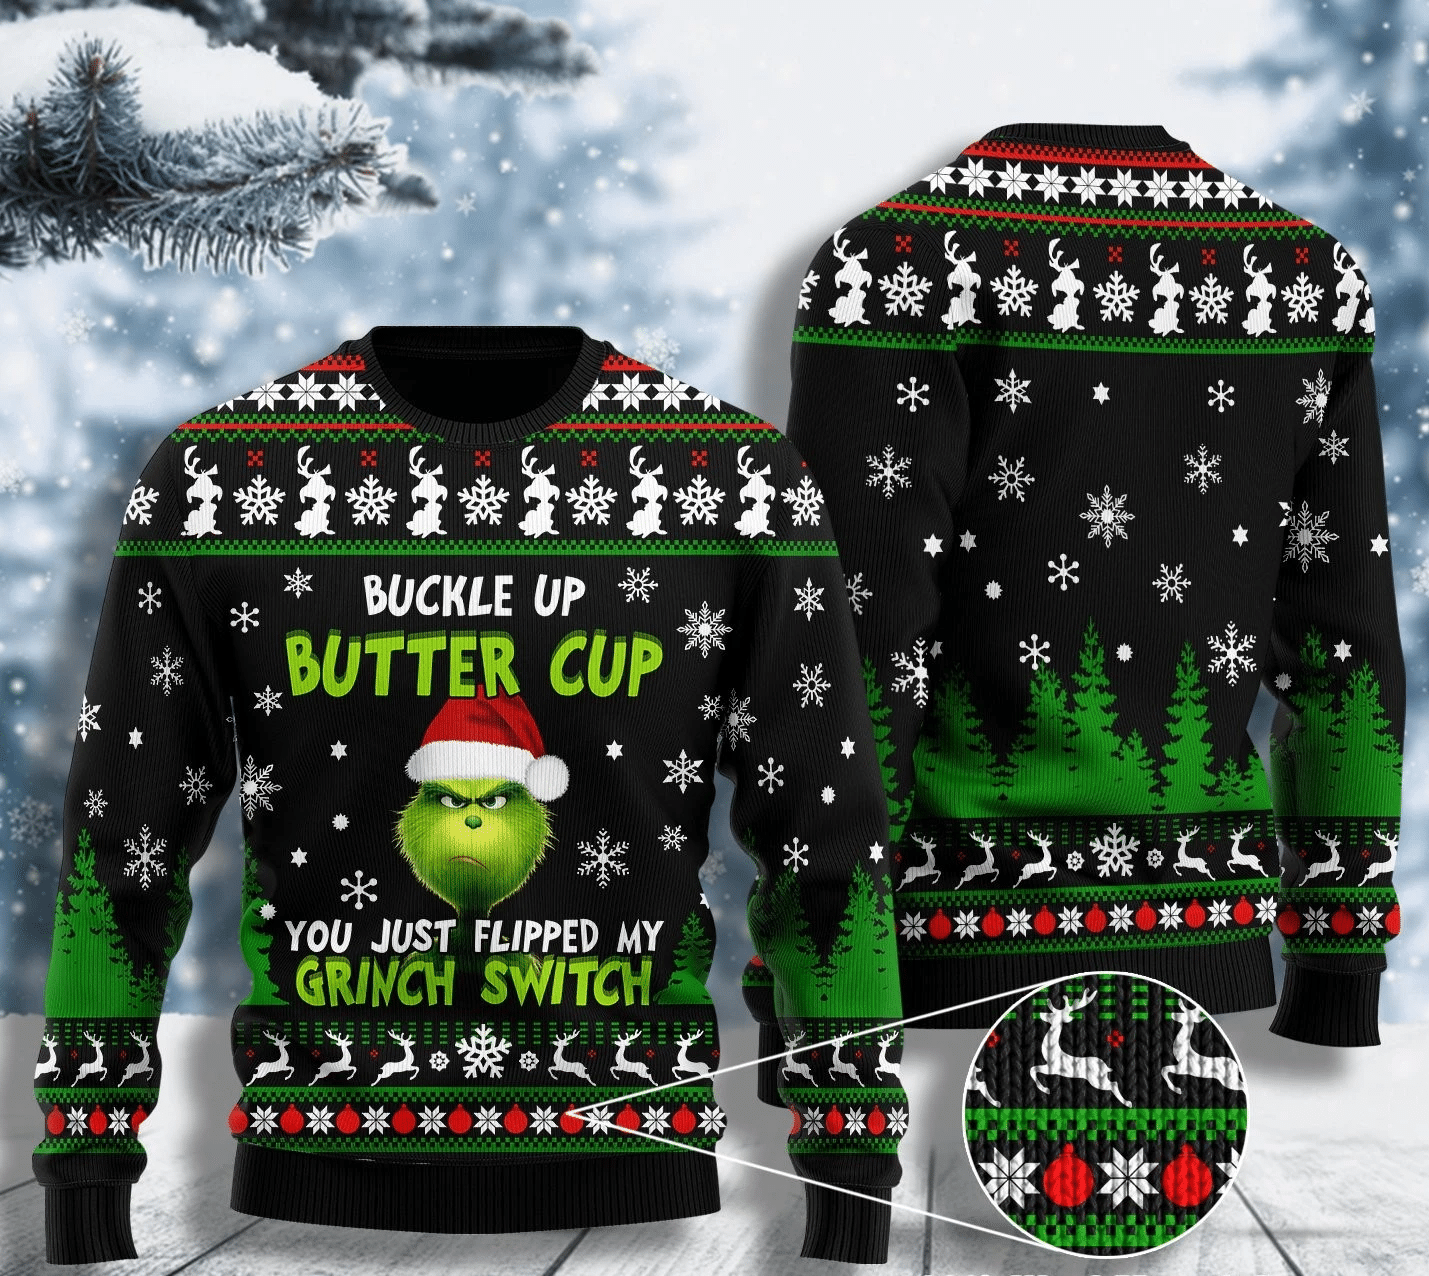 Buckle Up Buttercup Ugly Christmas Sweater.png